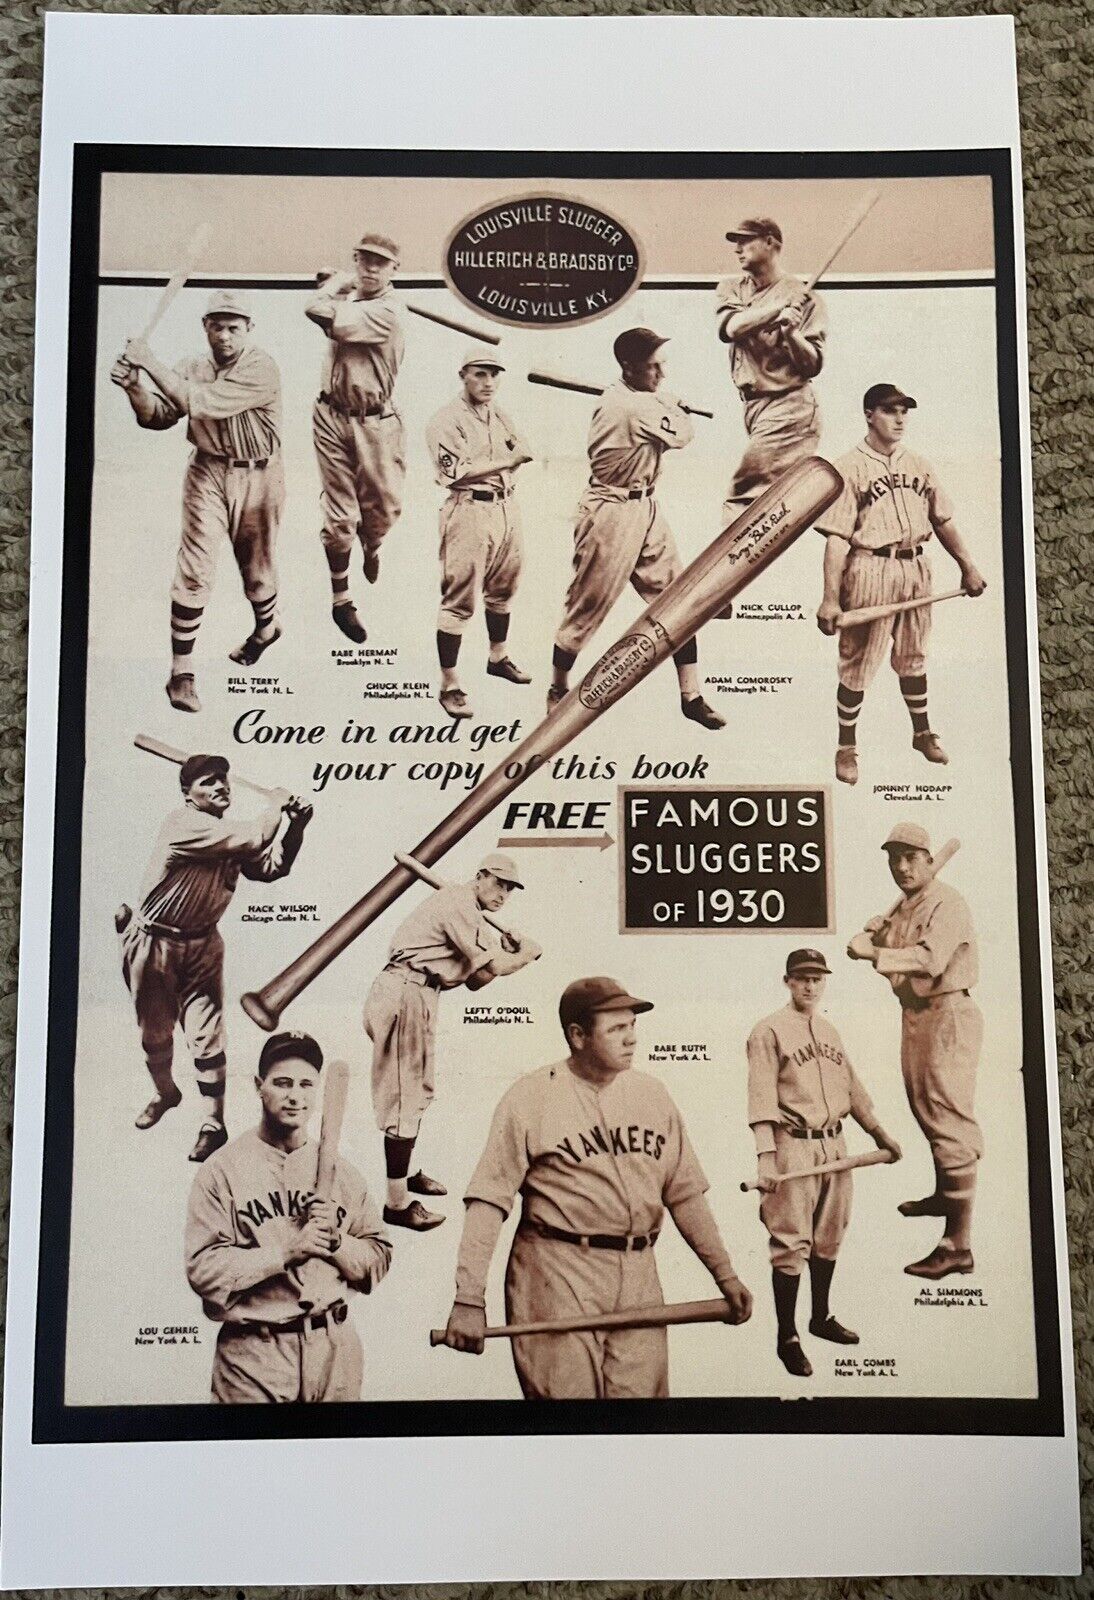 Hillerich And Bradsby Company  Famous Sluggers Poster 11 x 17   (138)